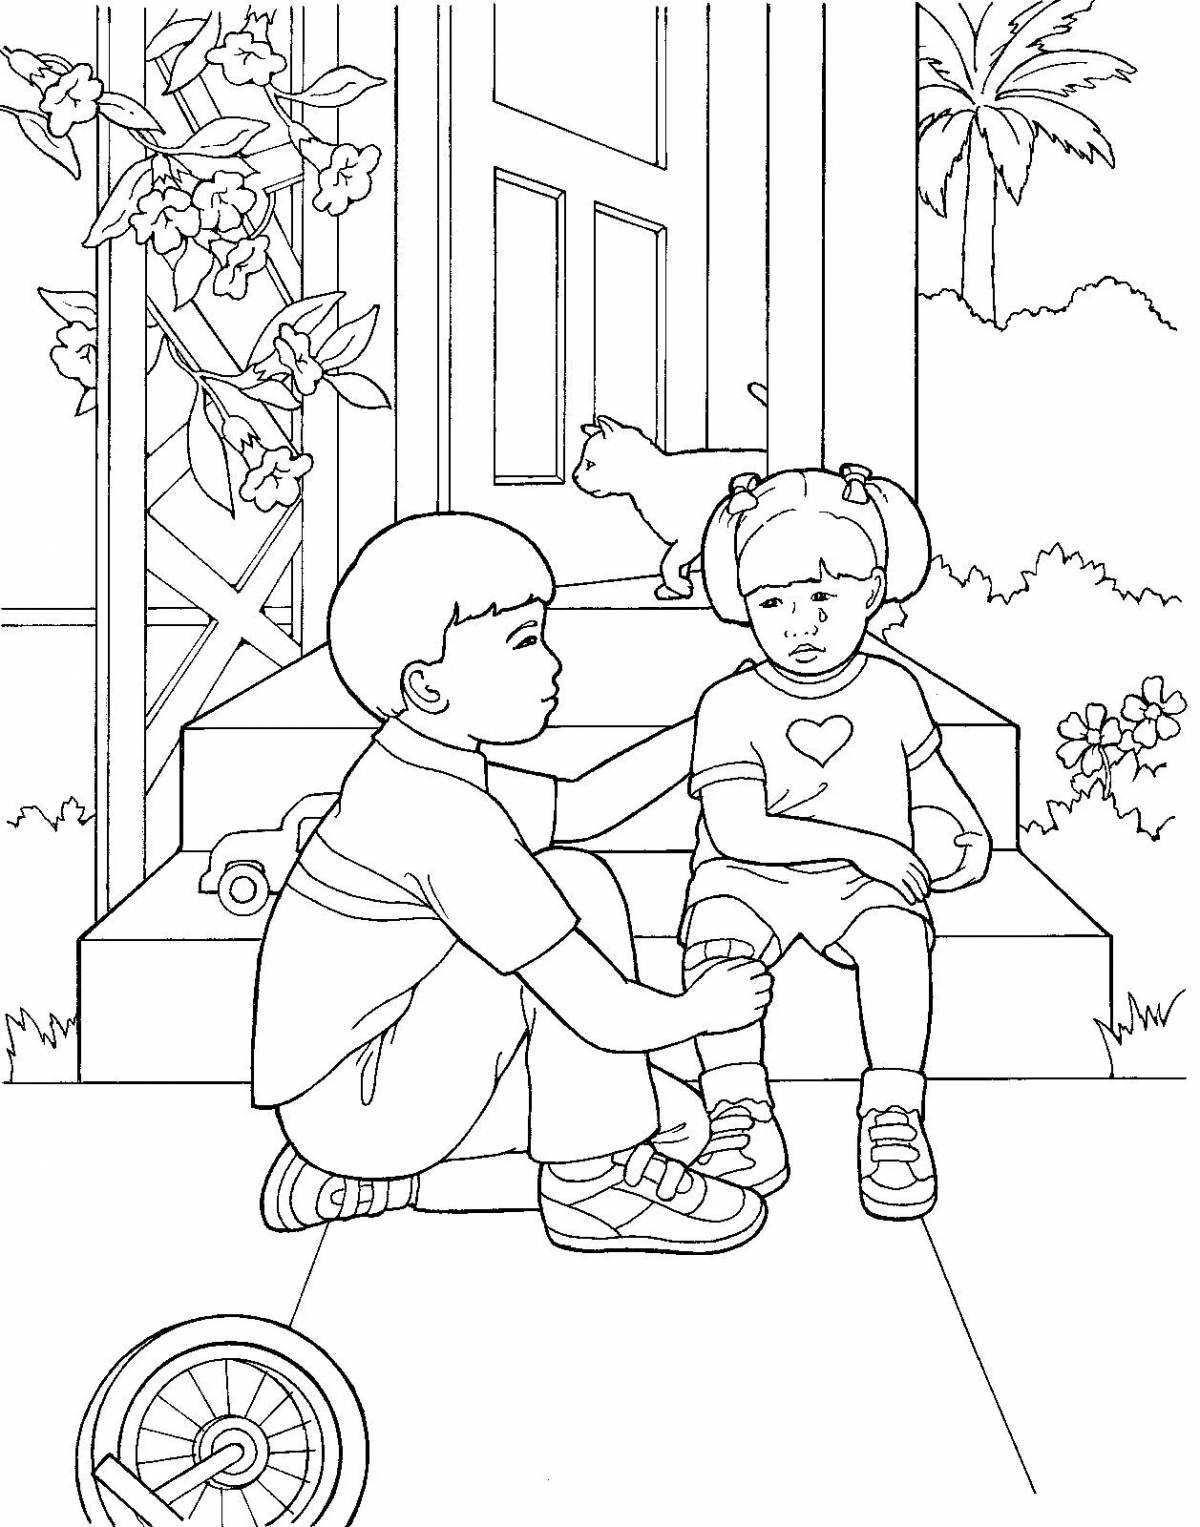 Updating the good deeds coloring page